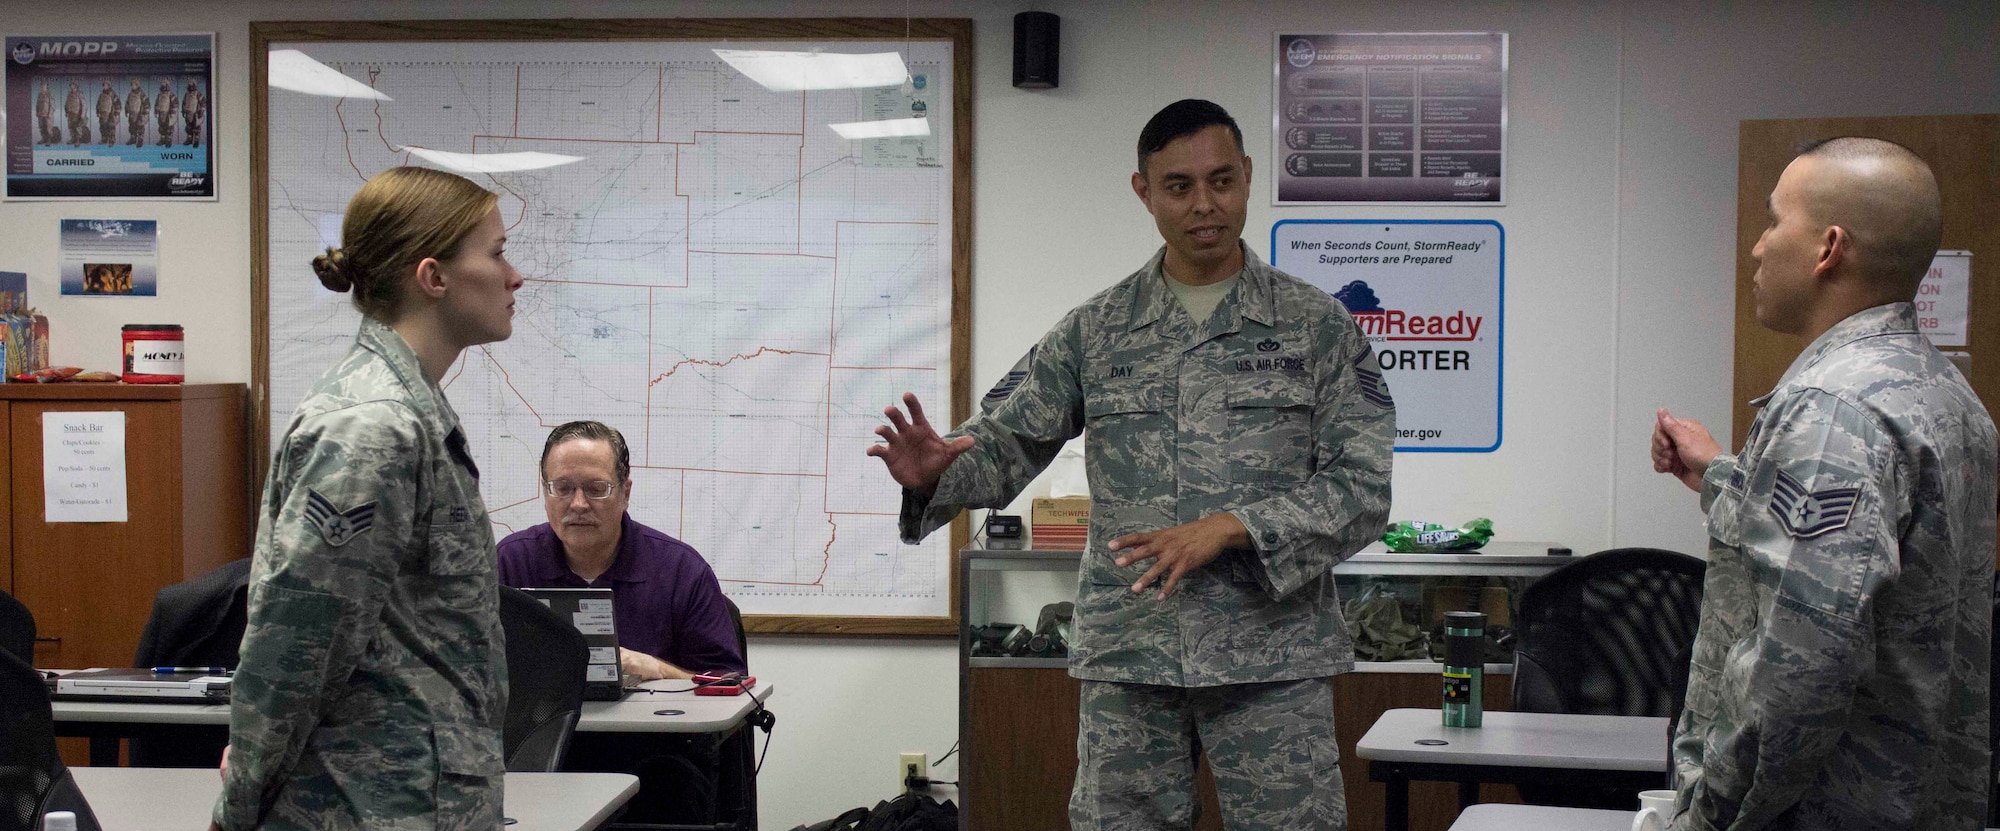 Master Sgt. Aron Day, NexGen system integration manager for the Air Force Civil Engineer Center Operations Maintenance Division, discusses a shop support business process with Scott Air Force Base, Illinois, personnel during a break at a March 2016 training event. The visit was aimed at informing operations flight personnel of the organization and business process changes required to prepare for the NexGenIT initial operating capability. (Air Force Photo/Susan Lawson/Released)